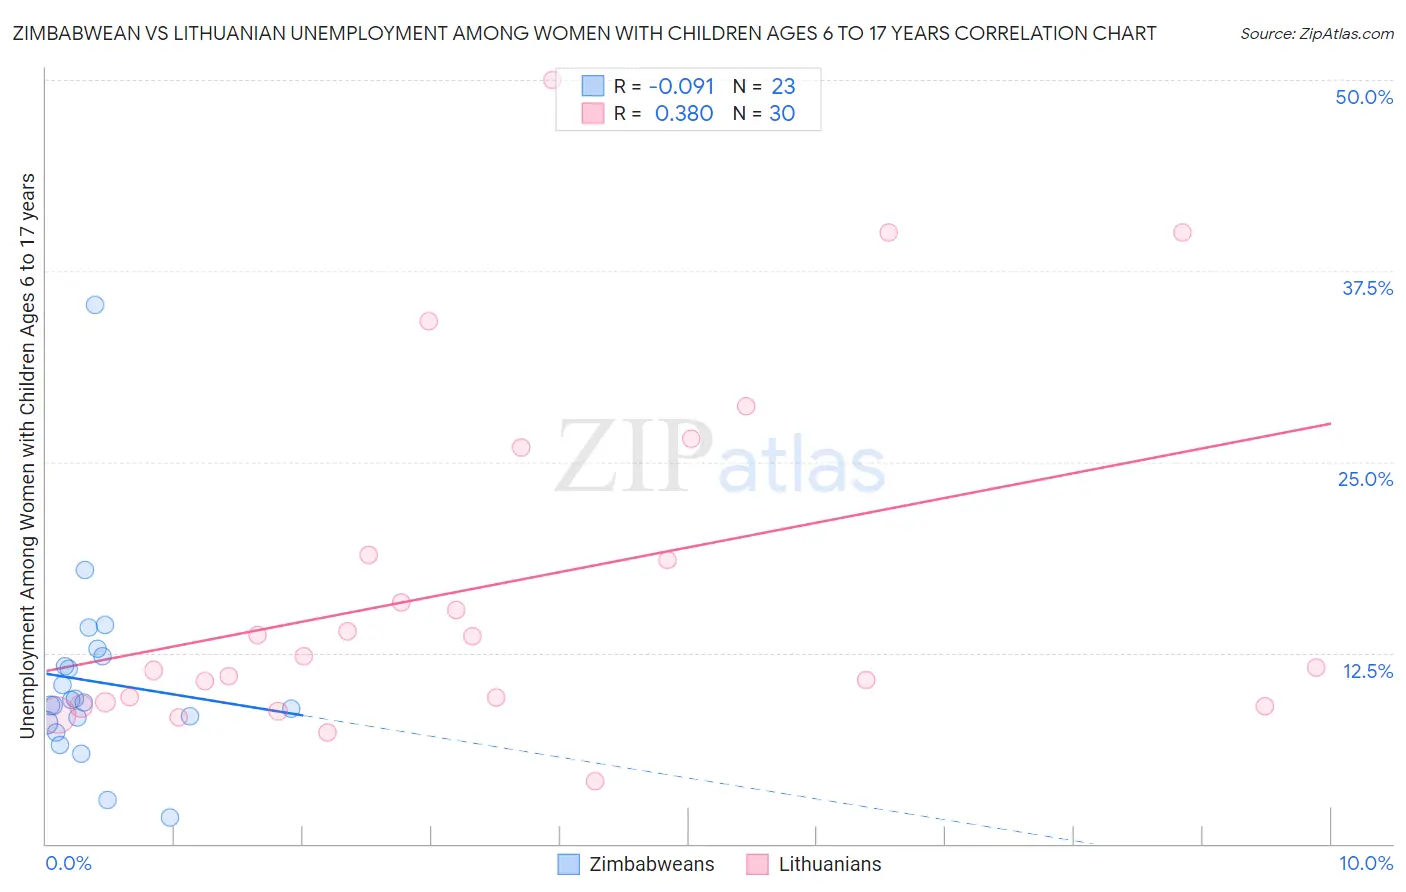 Zimbabwean vs Lithuanian Unemployment Among Women with Children Ages 6 to 17 years